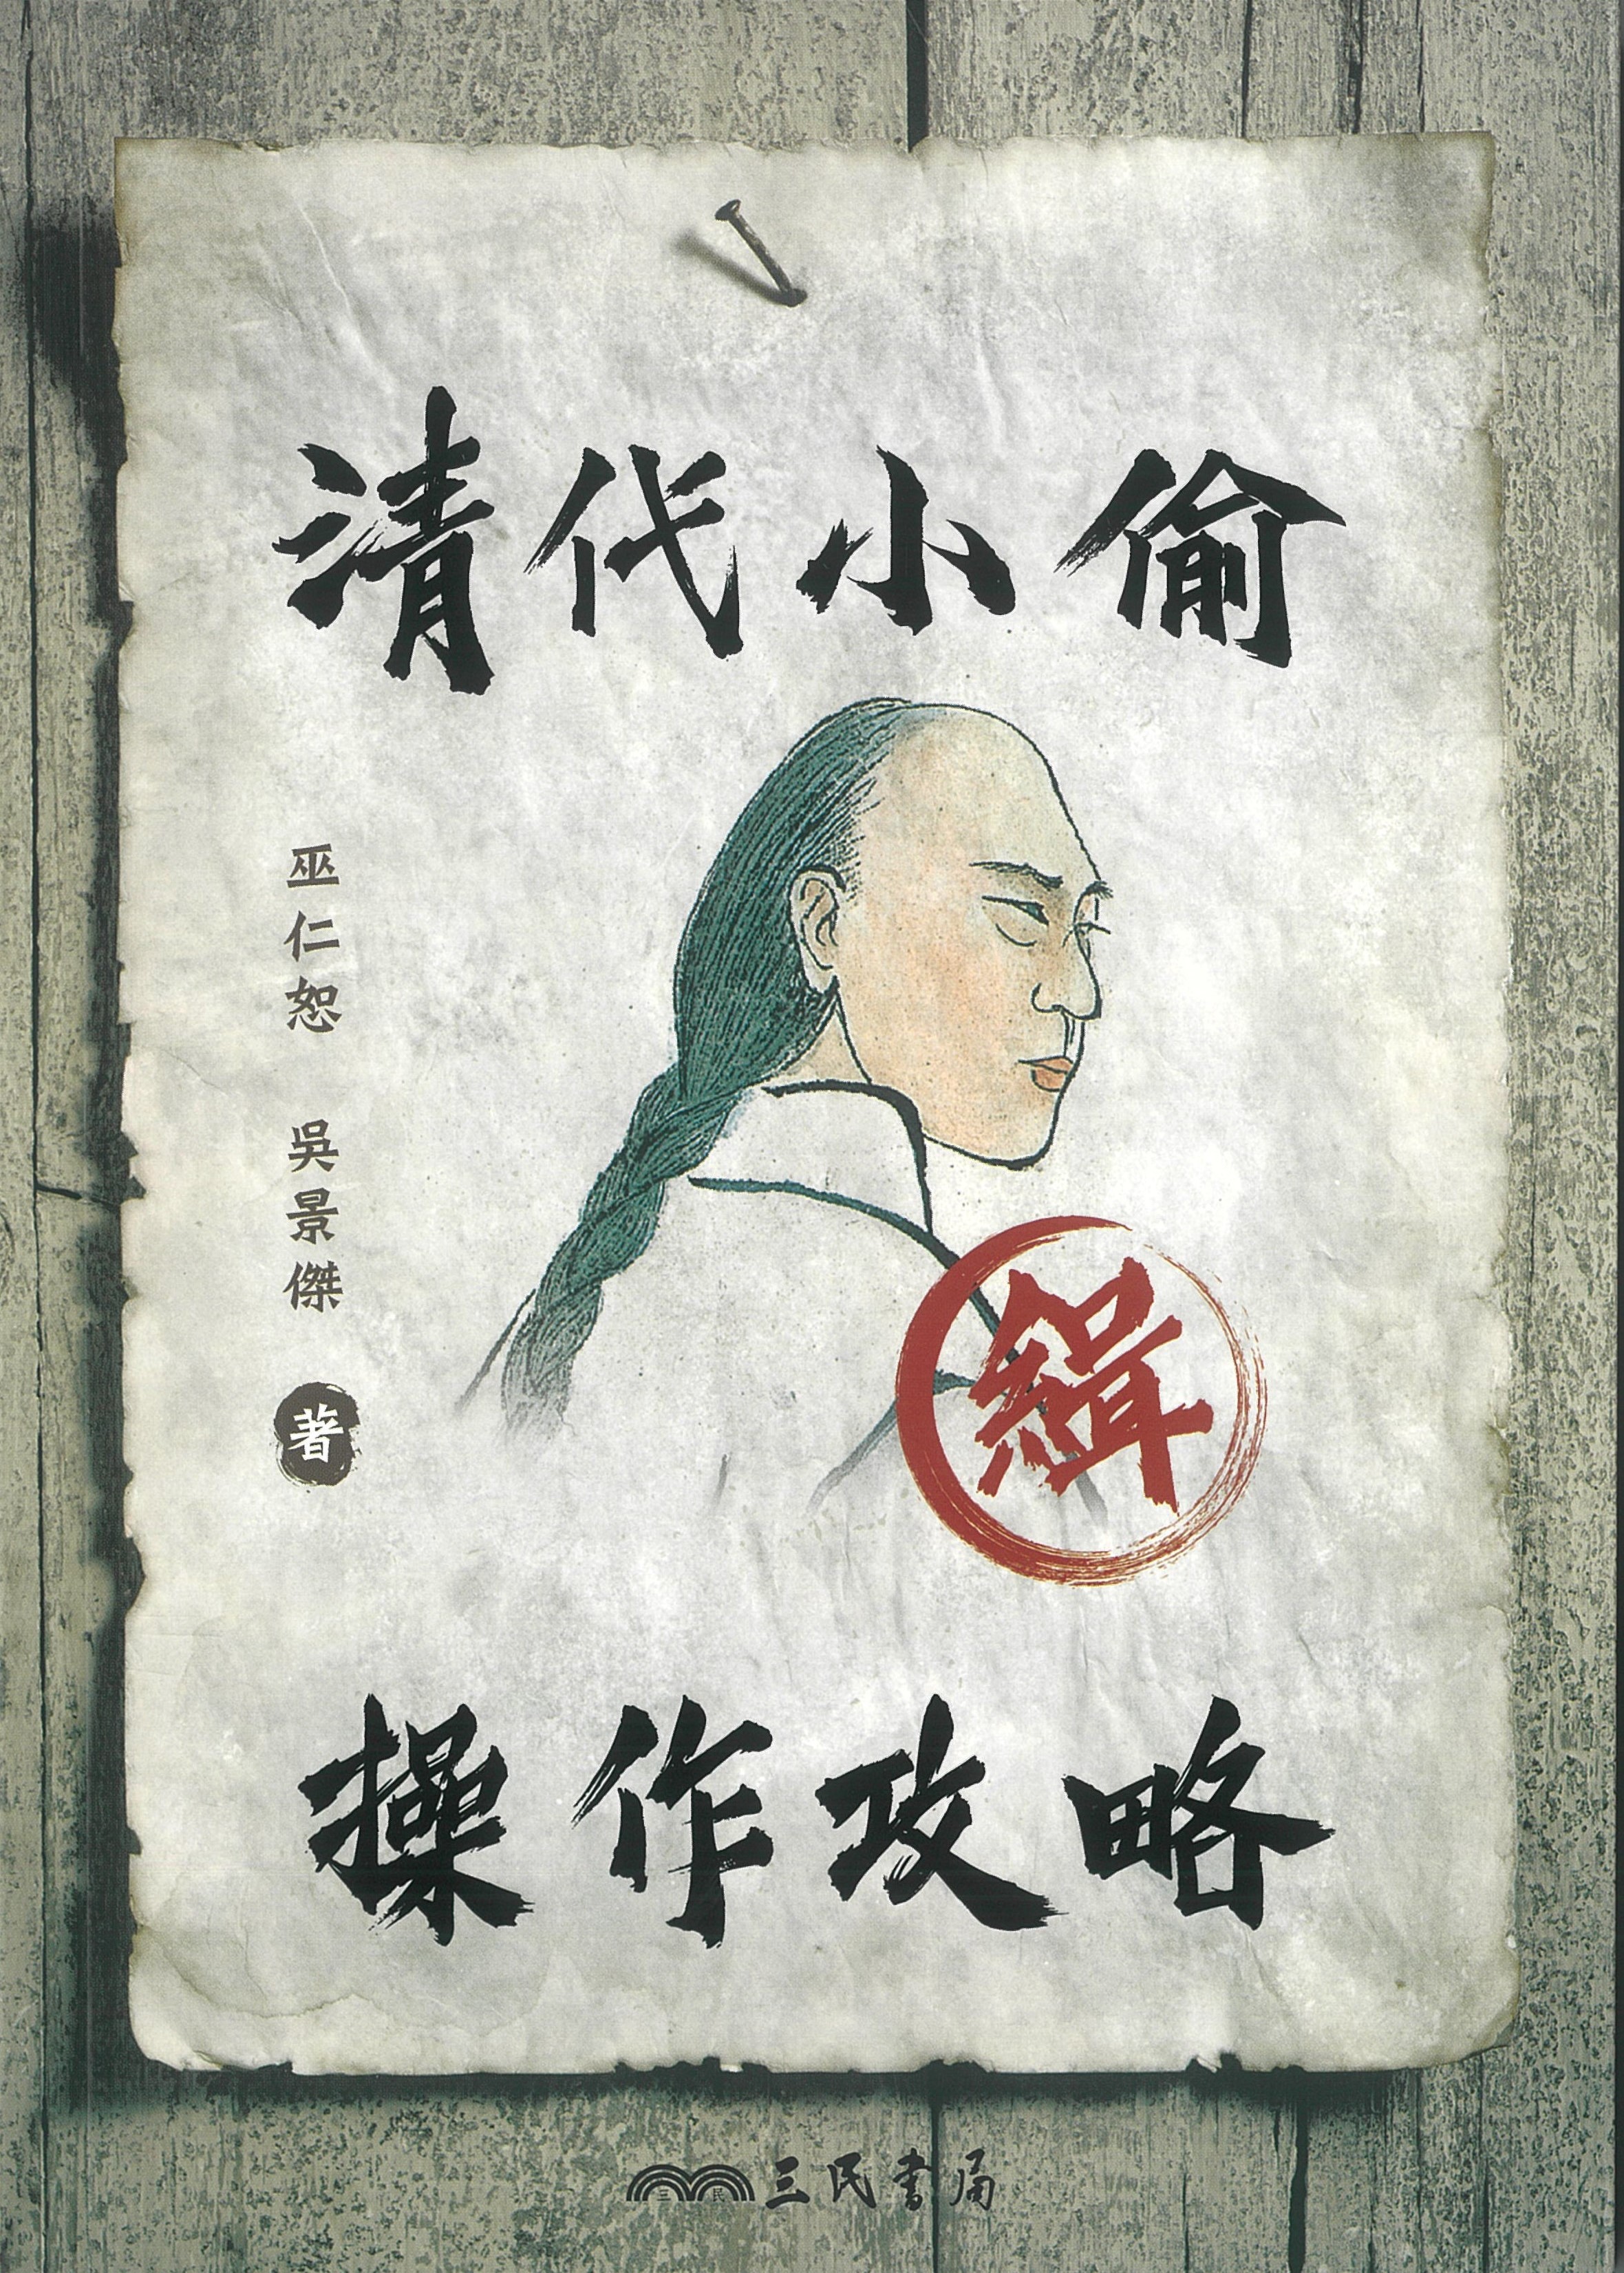 A Handbook for Thieves in Qing China